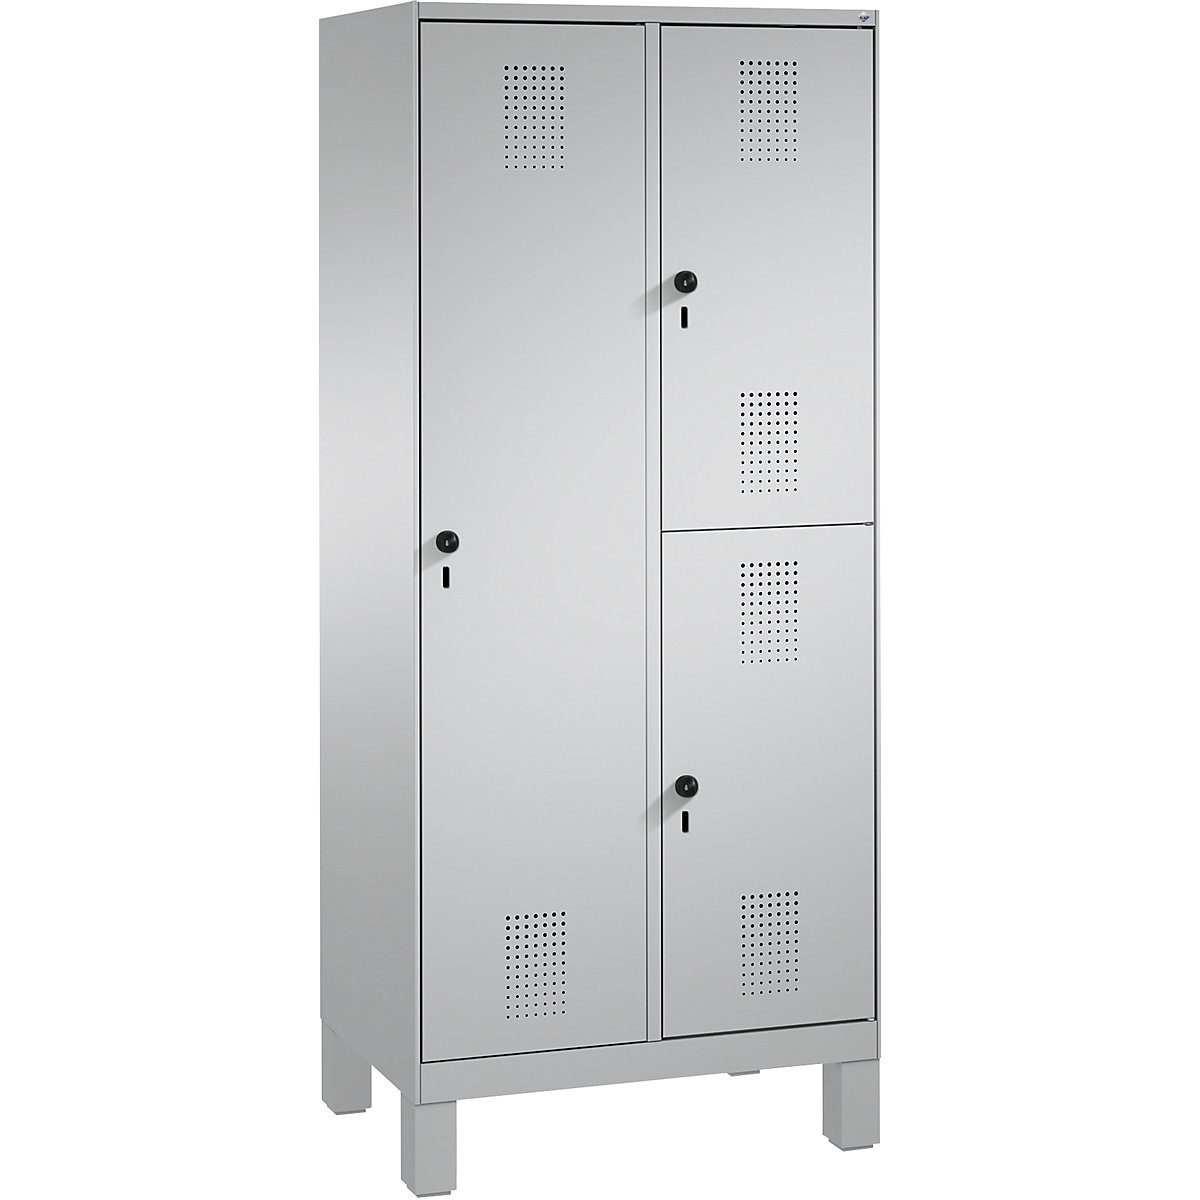 EVOLO combination cupboard, single and double tier – C+P, 2 compartments, 3 doors, compartment width 400 mm, with feet, white aluminium / white aluminium